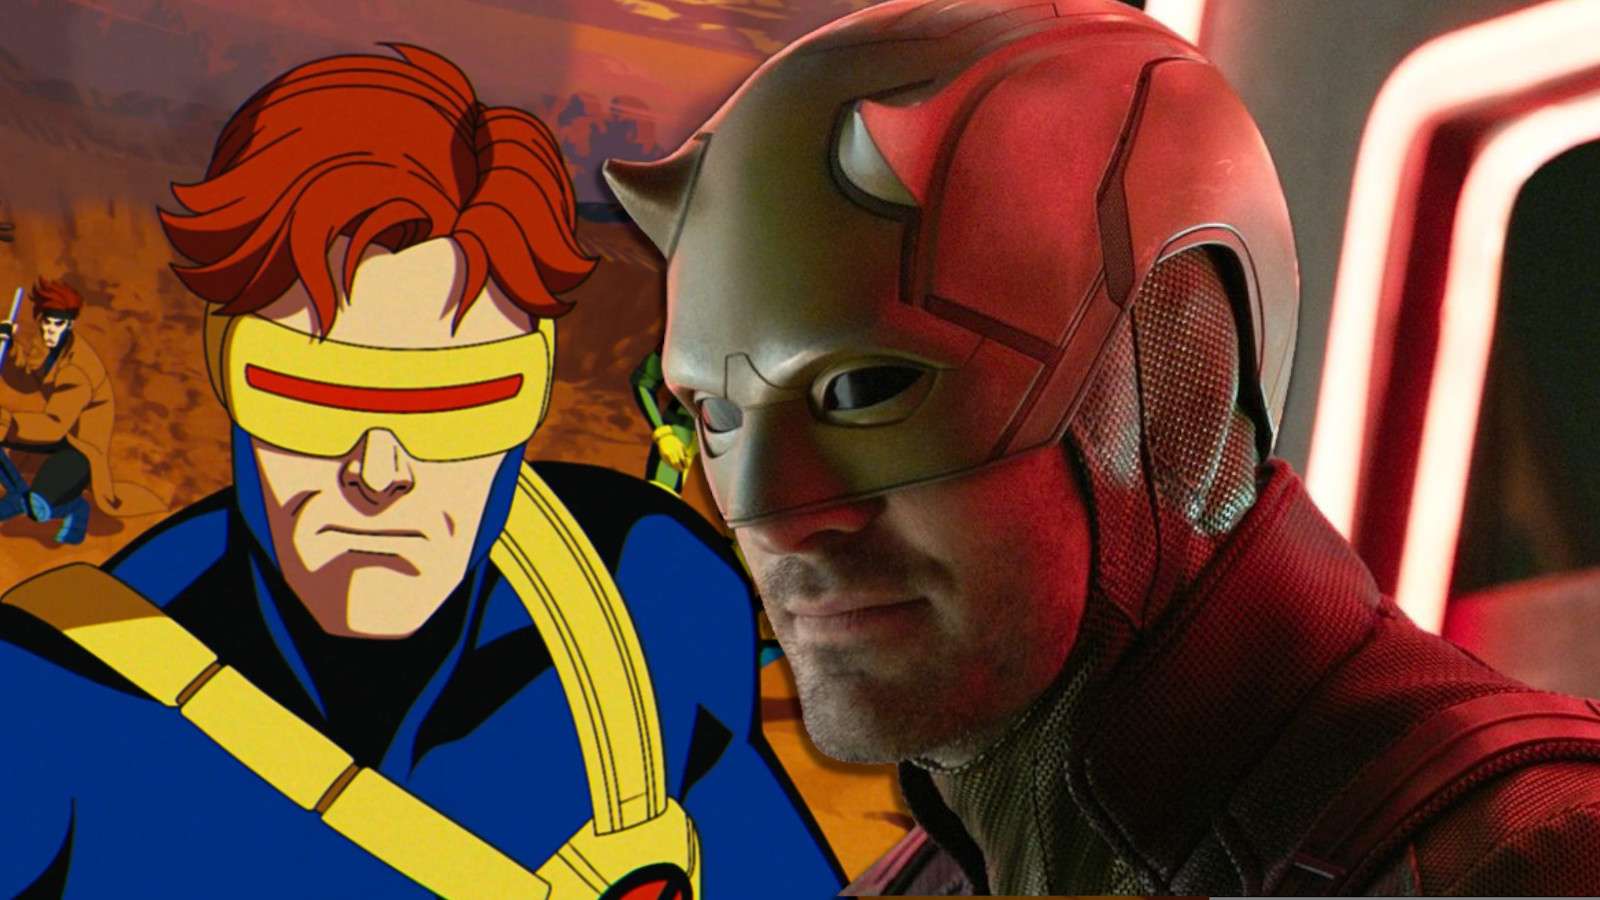 Cyclops from X-Men '97 and Daredevil from She-Hulk